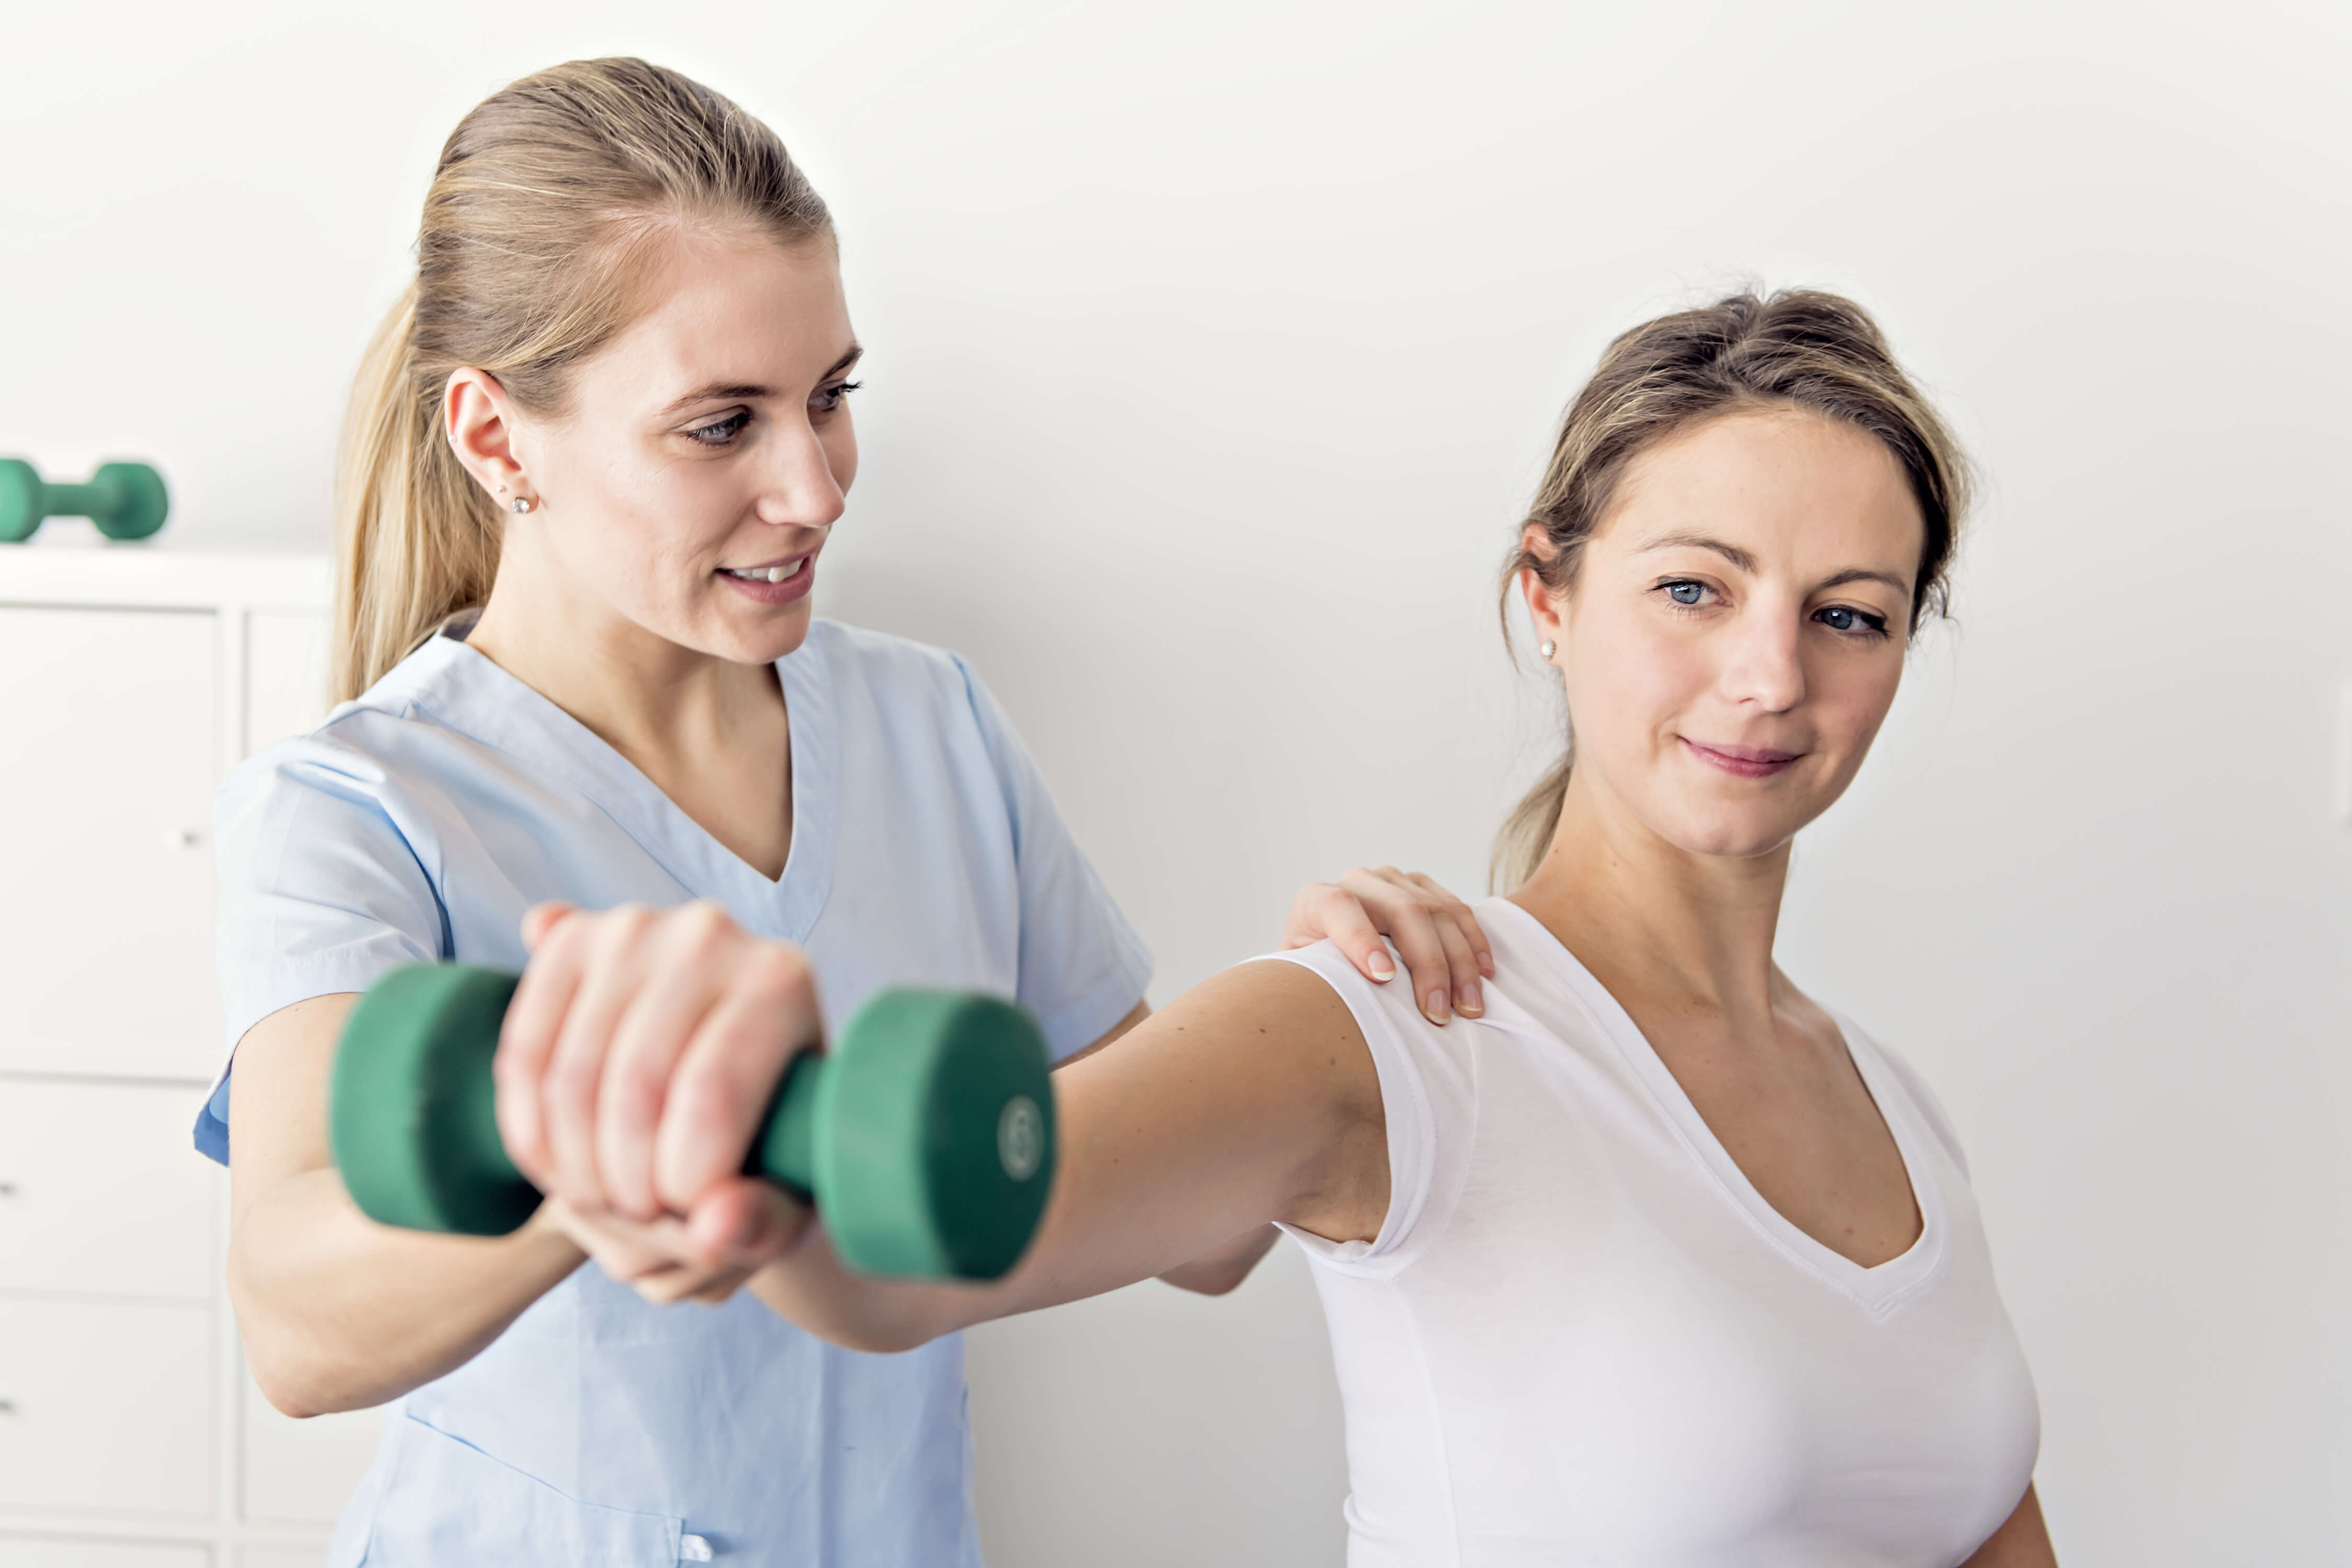 Physical Therapy in our clinic for Shoulder - Rotator Cuff Tears